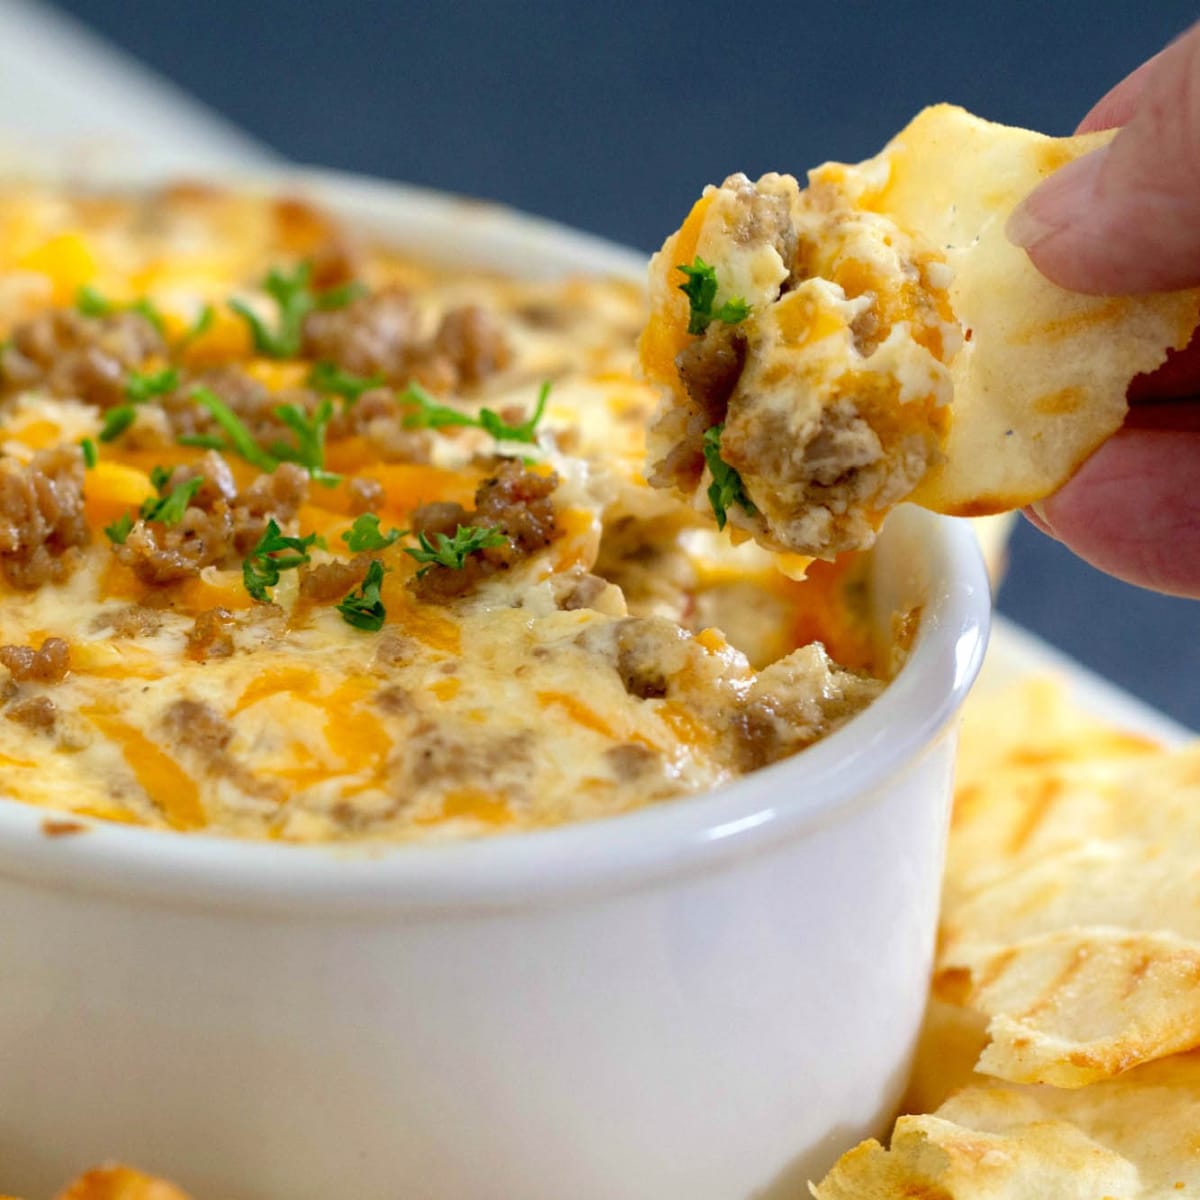 Dipping a chip into sausage cheese dip